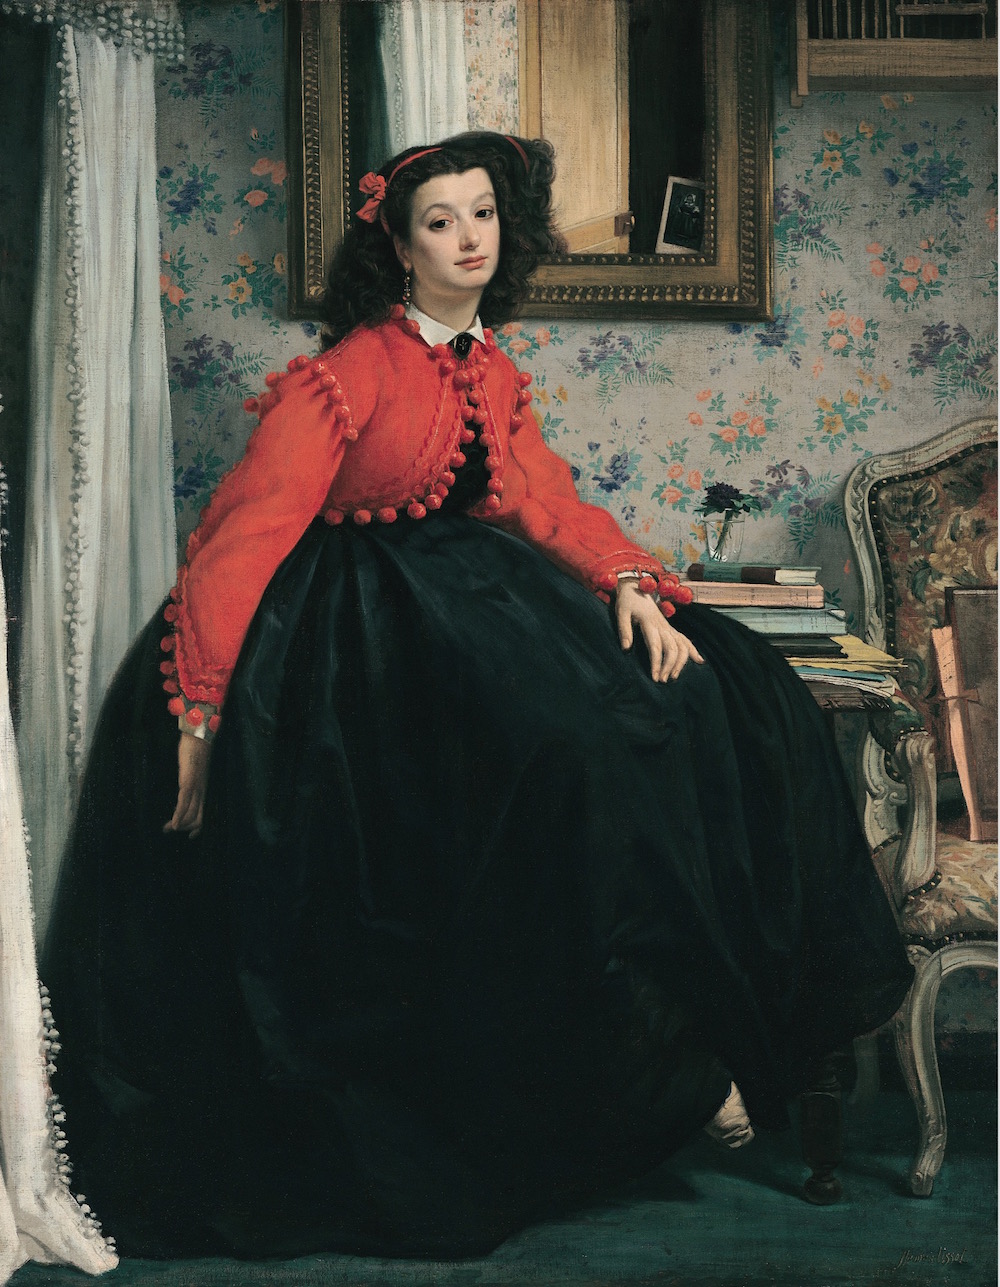 James Tissot, French, 1836–1902 "Portrait of Mademoiselle L. L...," 1864. Oil on canvas, 48 7/8 × 39 1/8 in. (123.5 × 99 cm) Musée d’Orsay, Paris, Acquired at the Thiébault-Sisson Sale, 1907, RF 2698  Musée d’Orsay,© RMN-Grand Palais / Art Resource, NY.  Image provided courtesy of the Fine Arts Museums of San Francisco